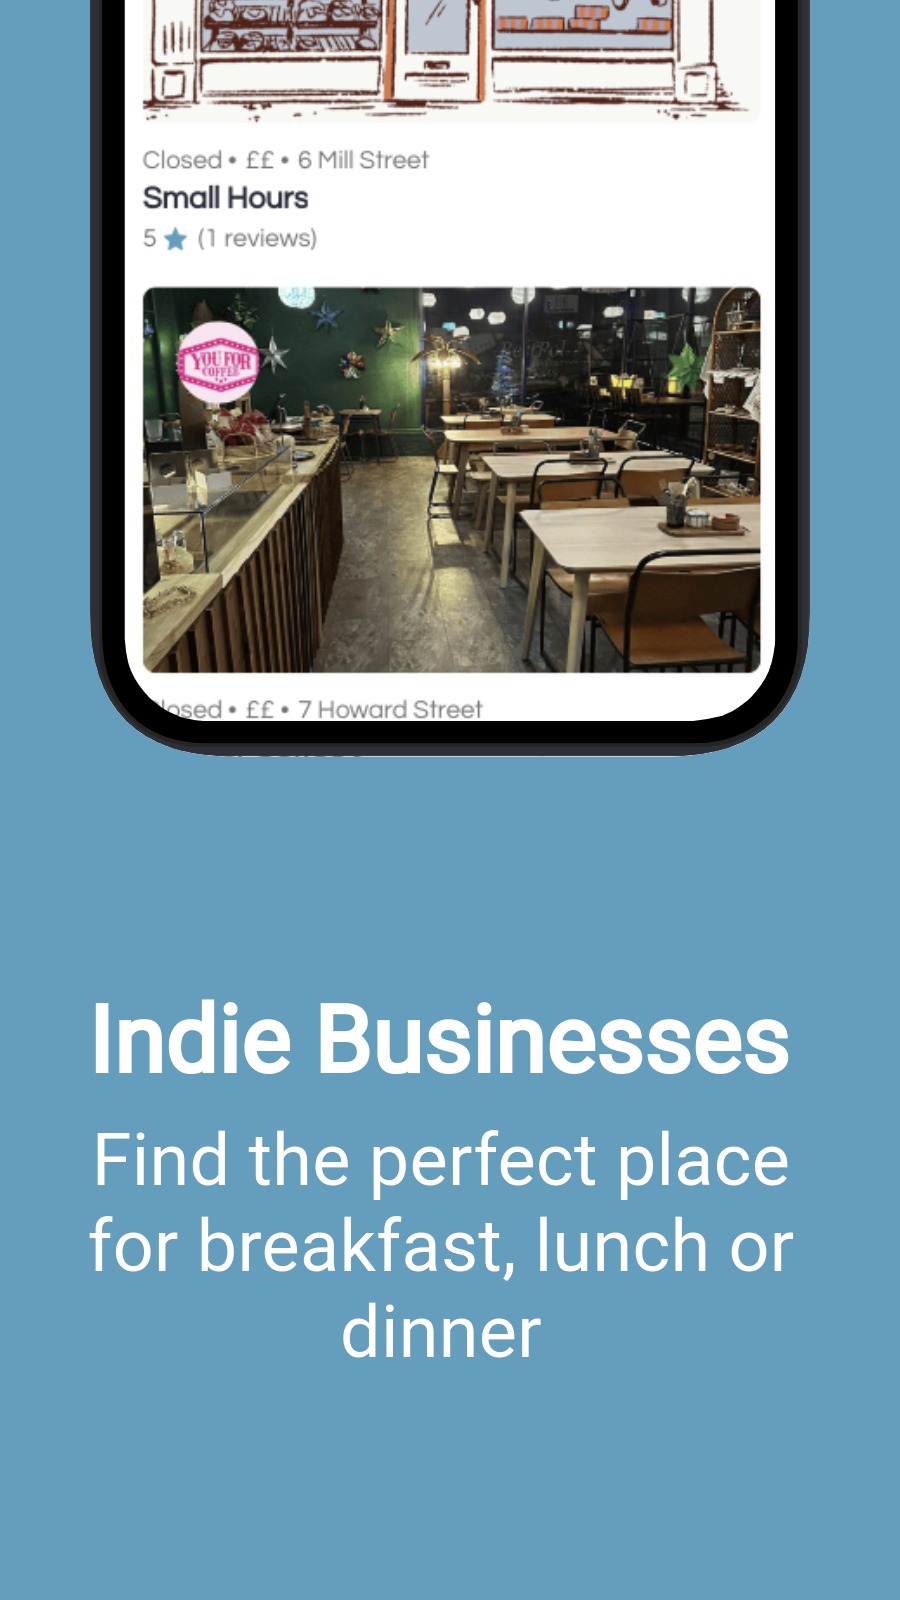 Indie Businesses - Find the perfect place for breakfast, lunch or dinner